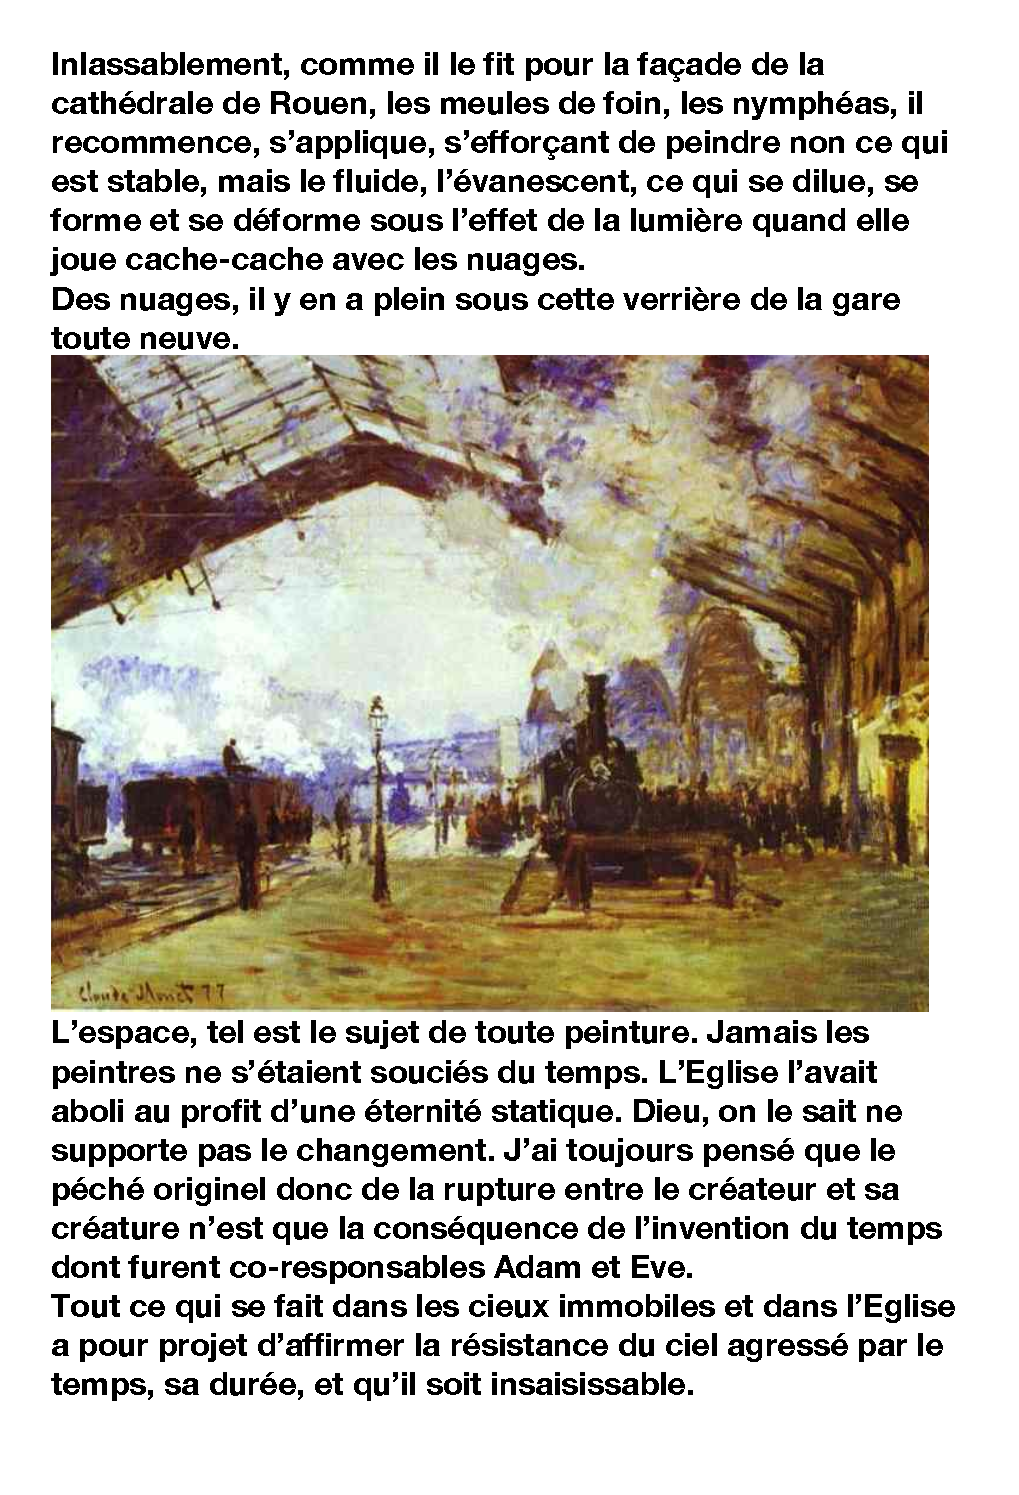 chaque-jour-2_page_04.1175326646.png